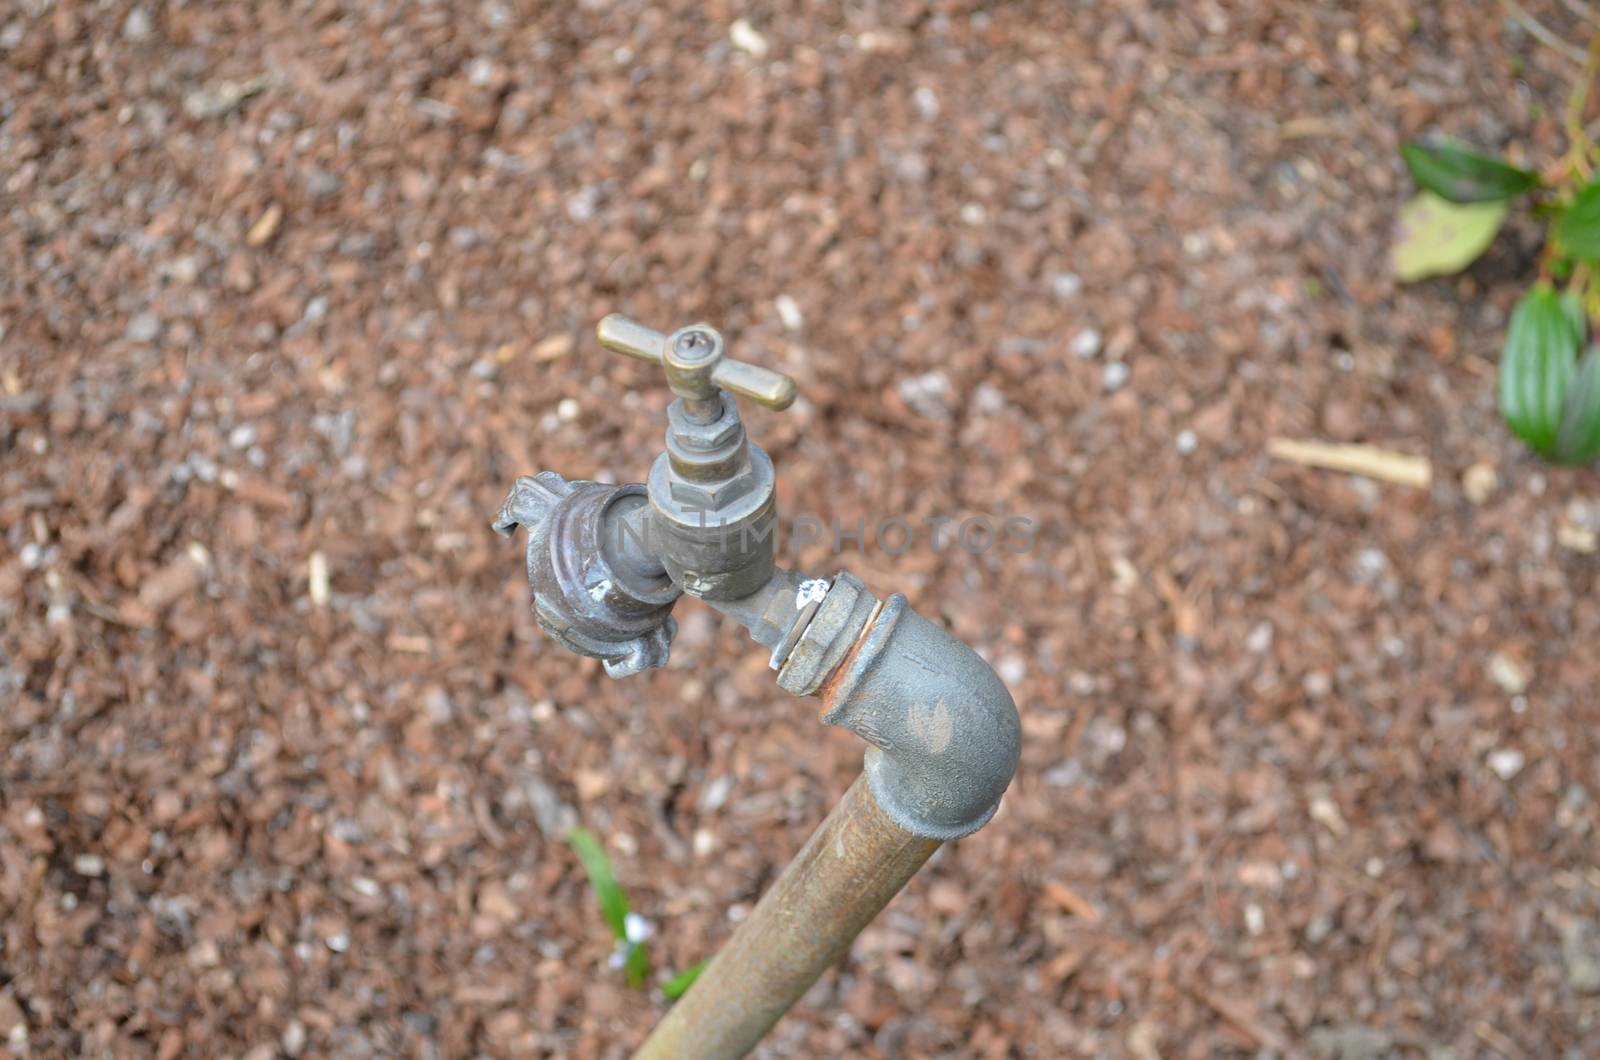 Outdoors garden water tap ready to be used on a dry garden.